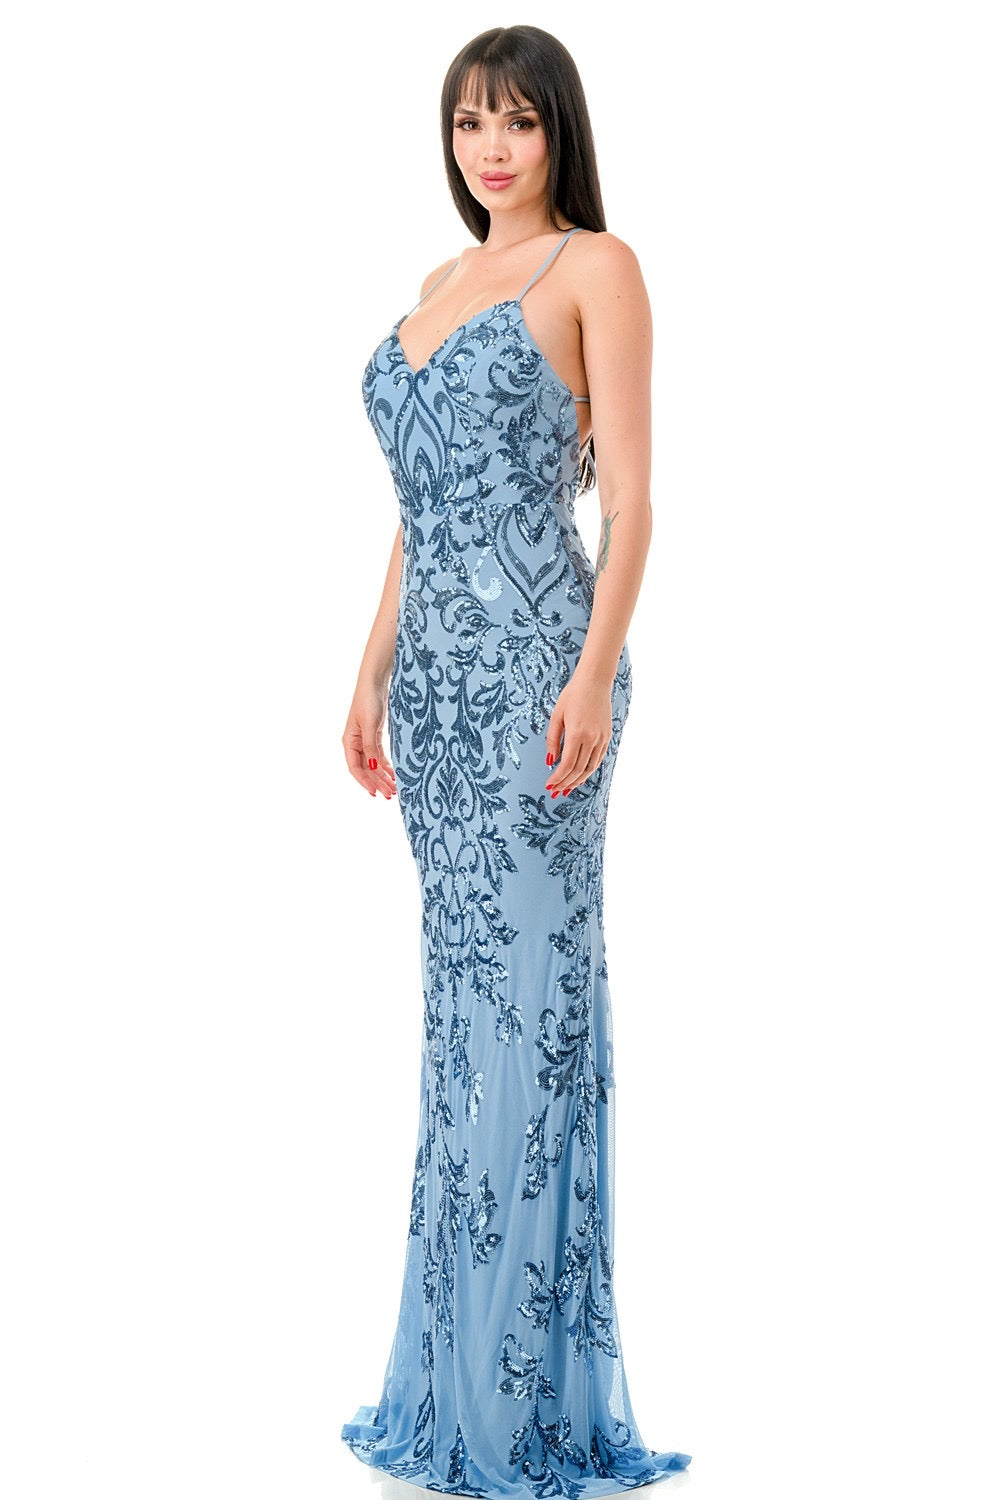 Bay Sequin Embellished Criss Cross Bodycon Blue Maxi Dress